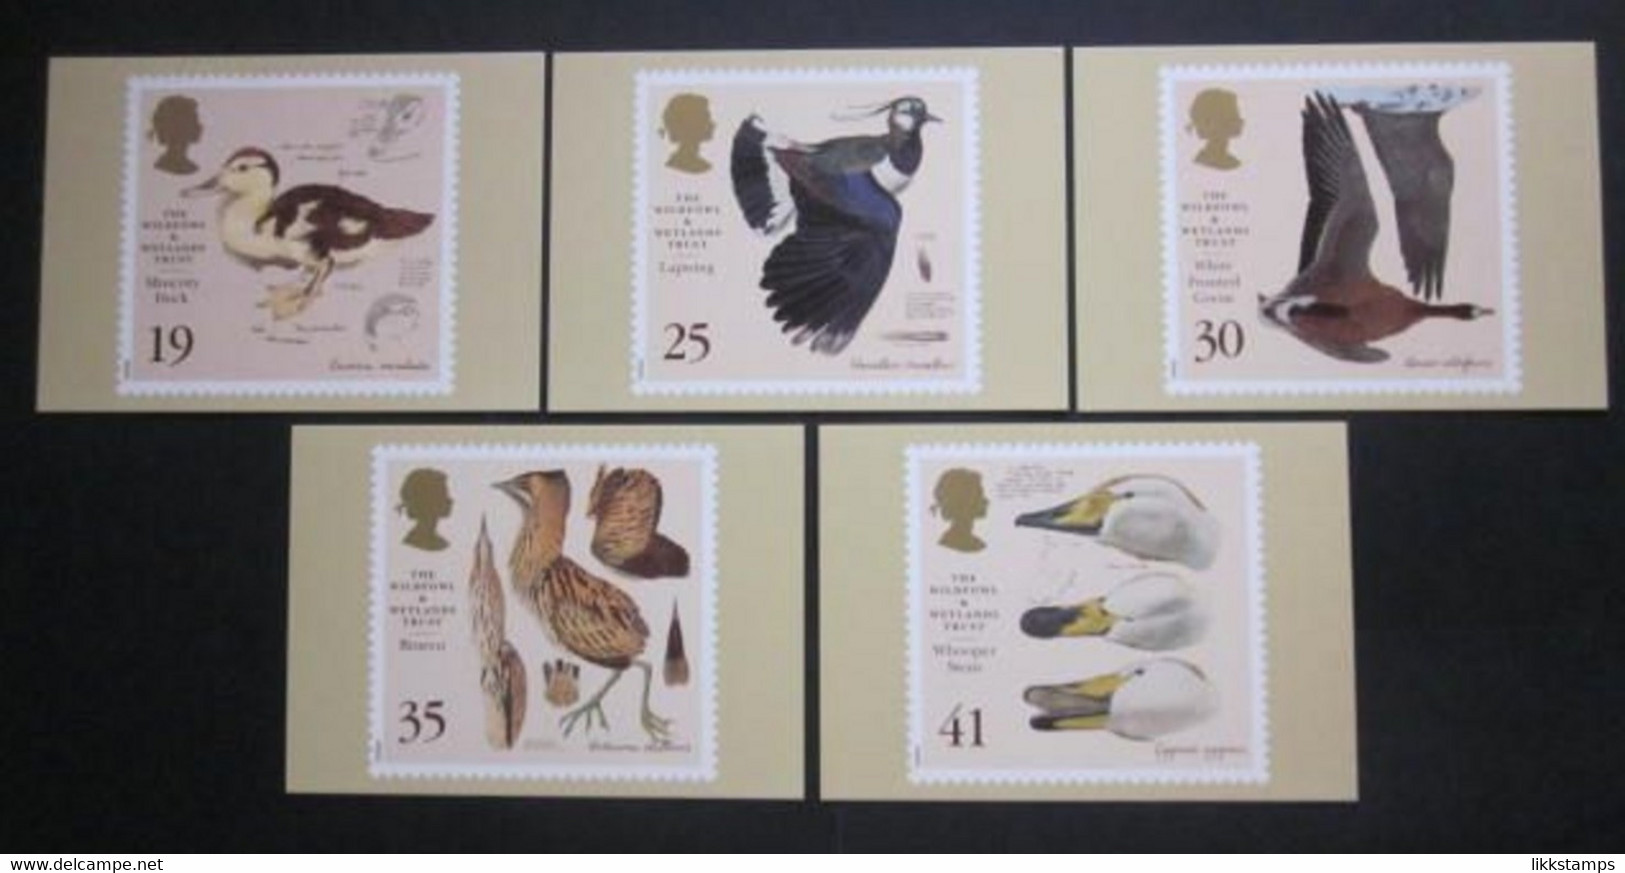 1996 THE 50th ANNIVERSARY OF THE WILDFOWL AND WETLANDS TRUST P.H.Q. CARDS UNUSED, ISSUE No. 177 (C) #01126 - Cartes PHQ